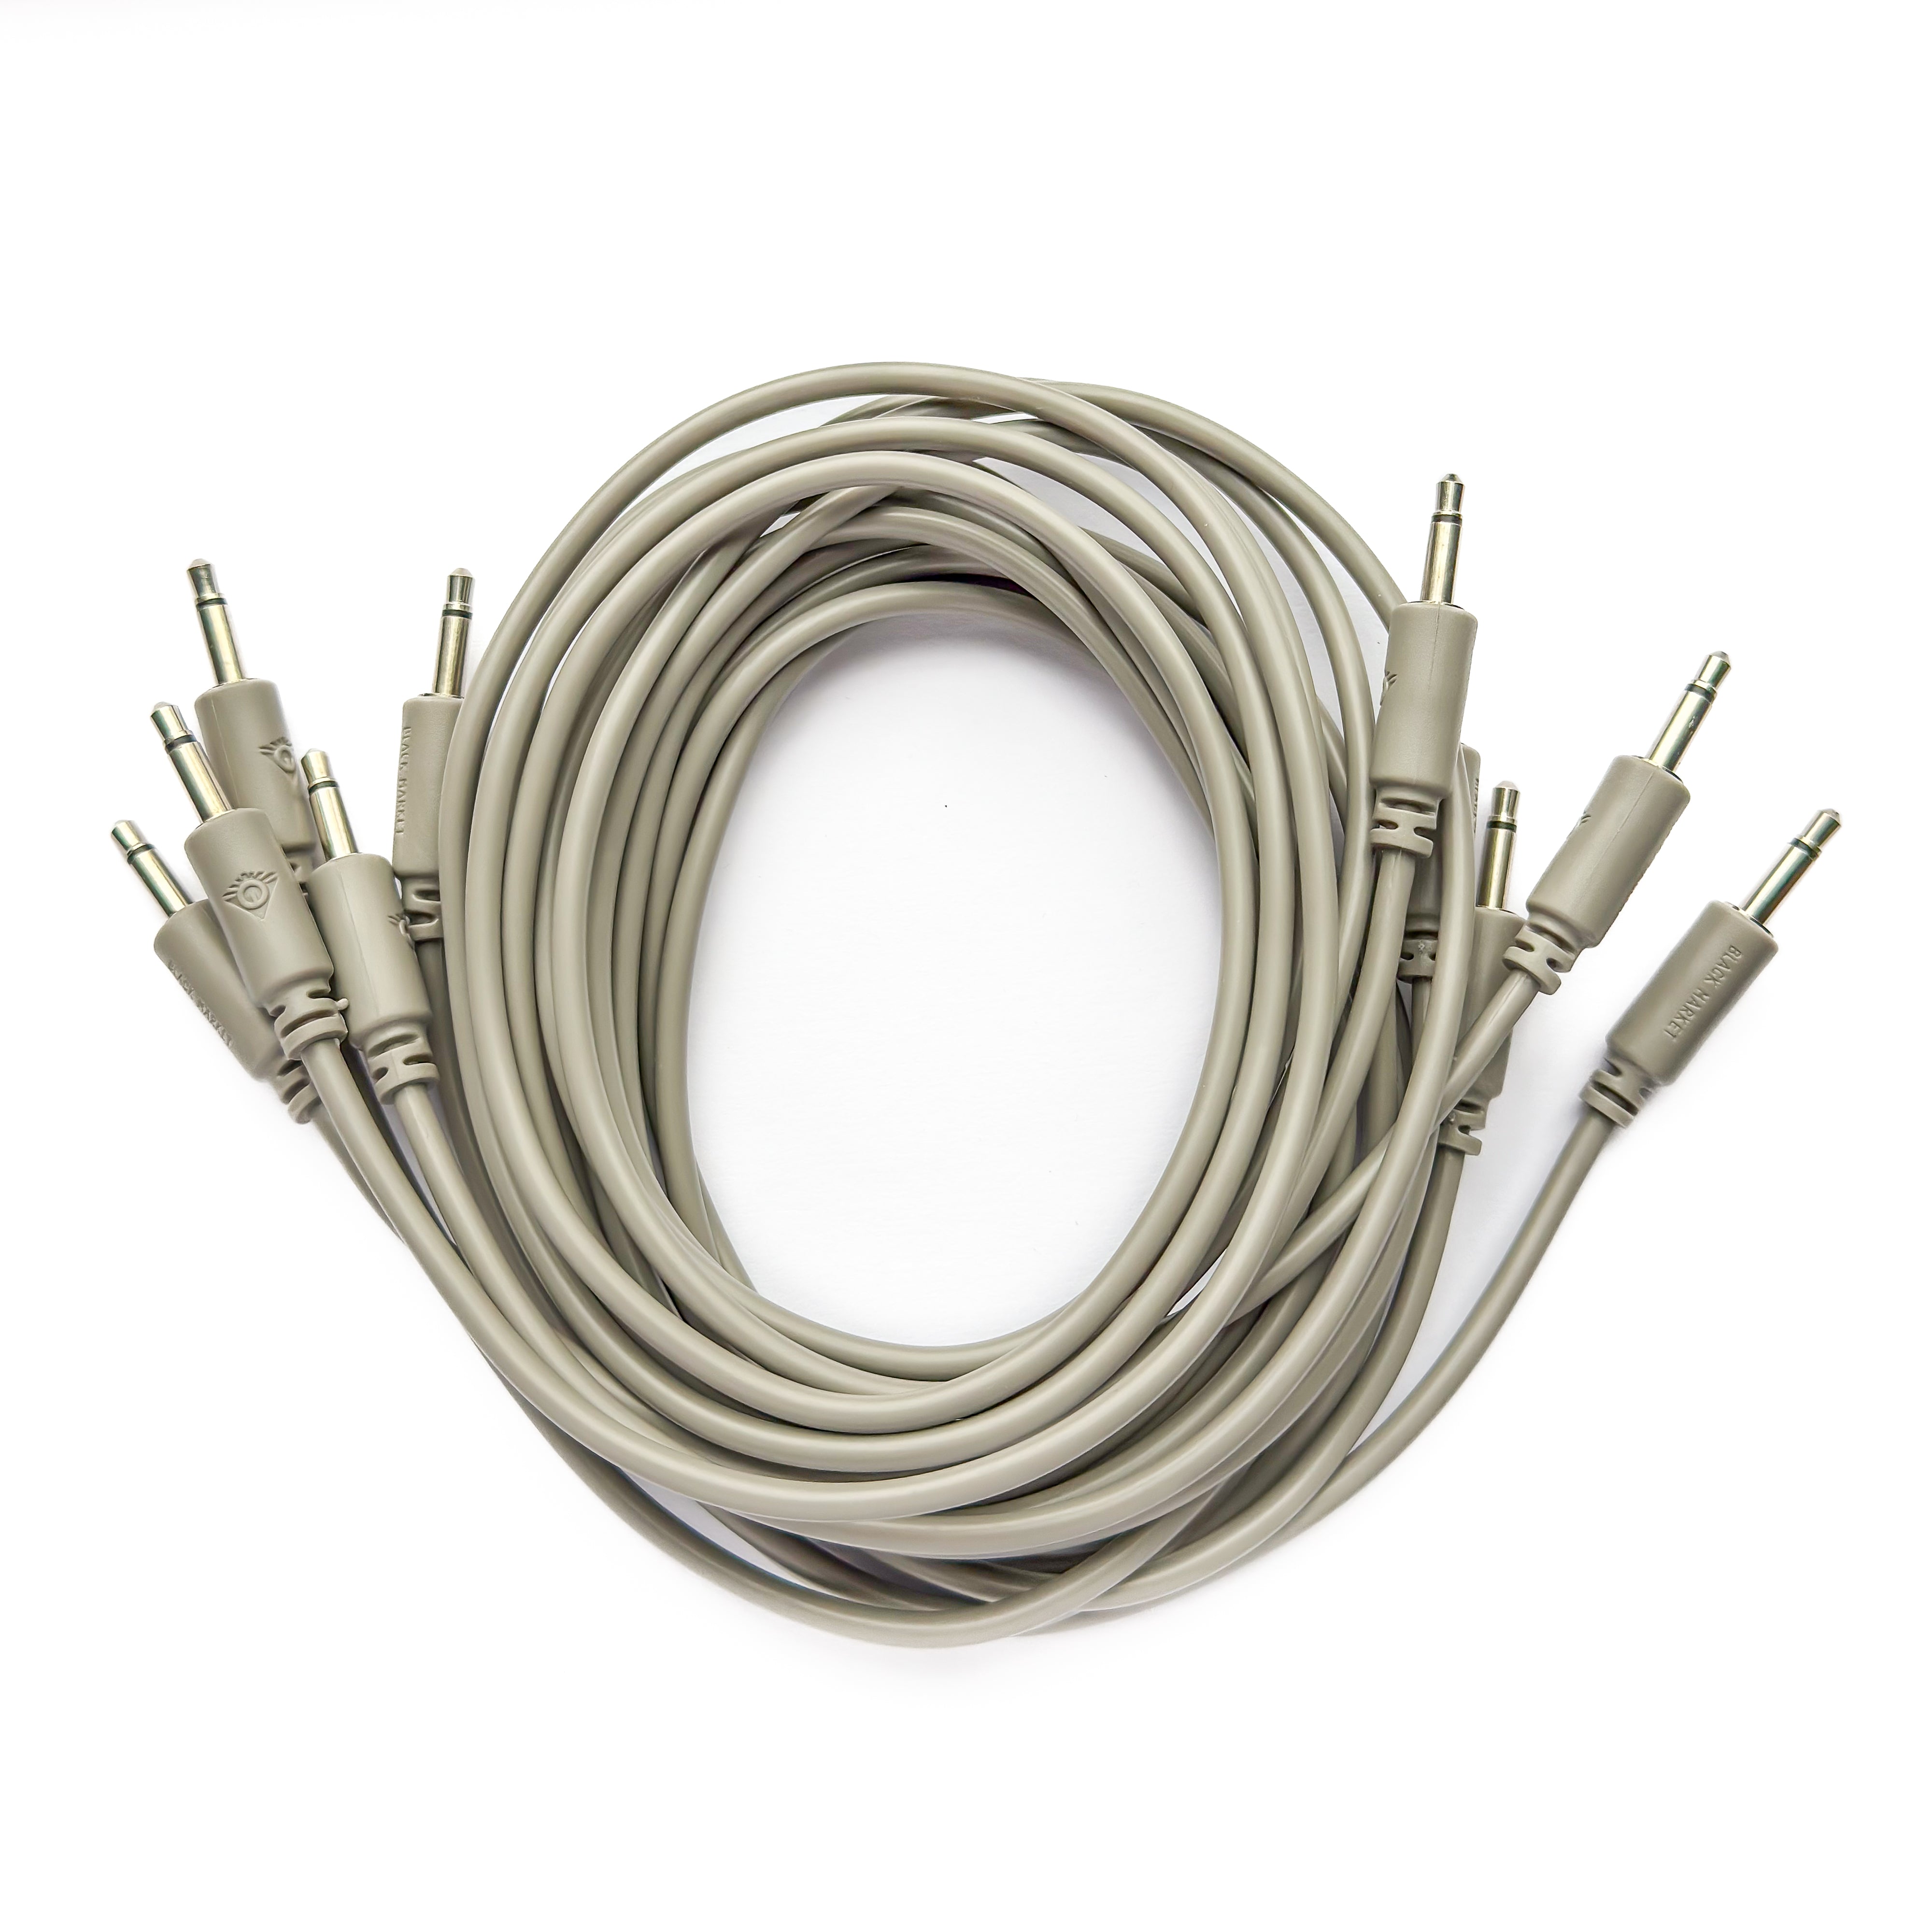 Black Market Modular 3.5mm Patch Cable 5-Pack - 100cm/40" - Gray View 1